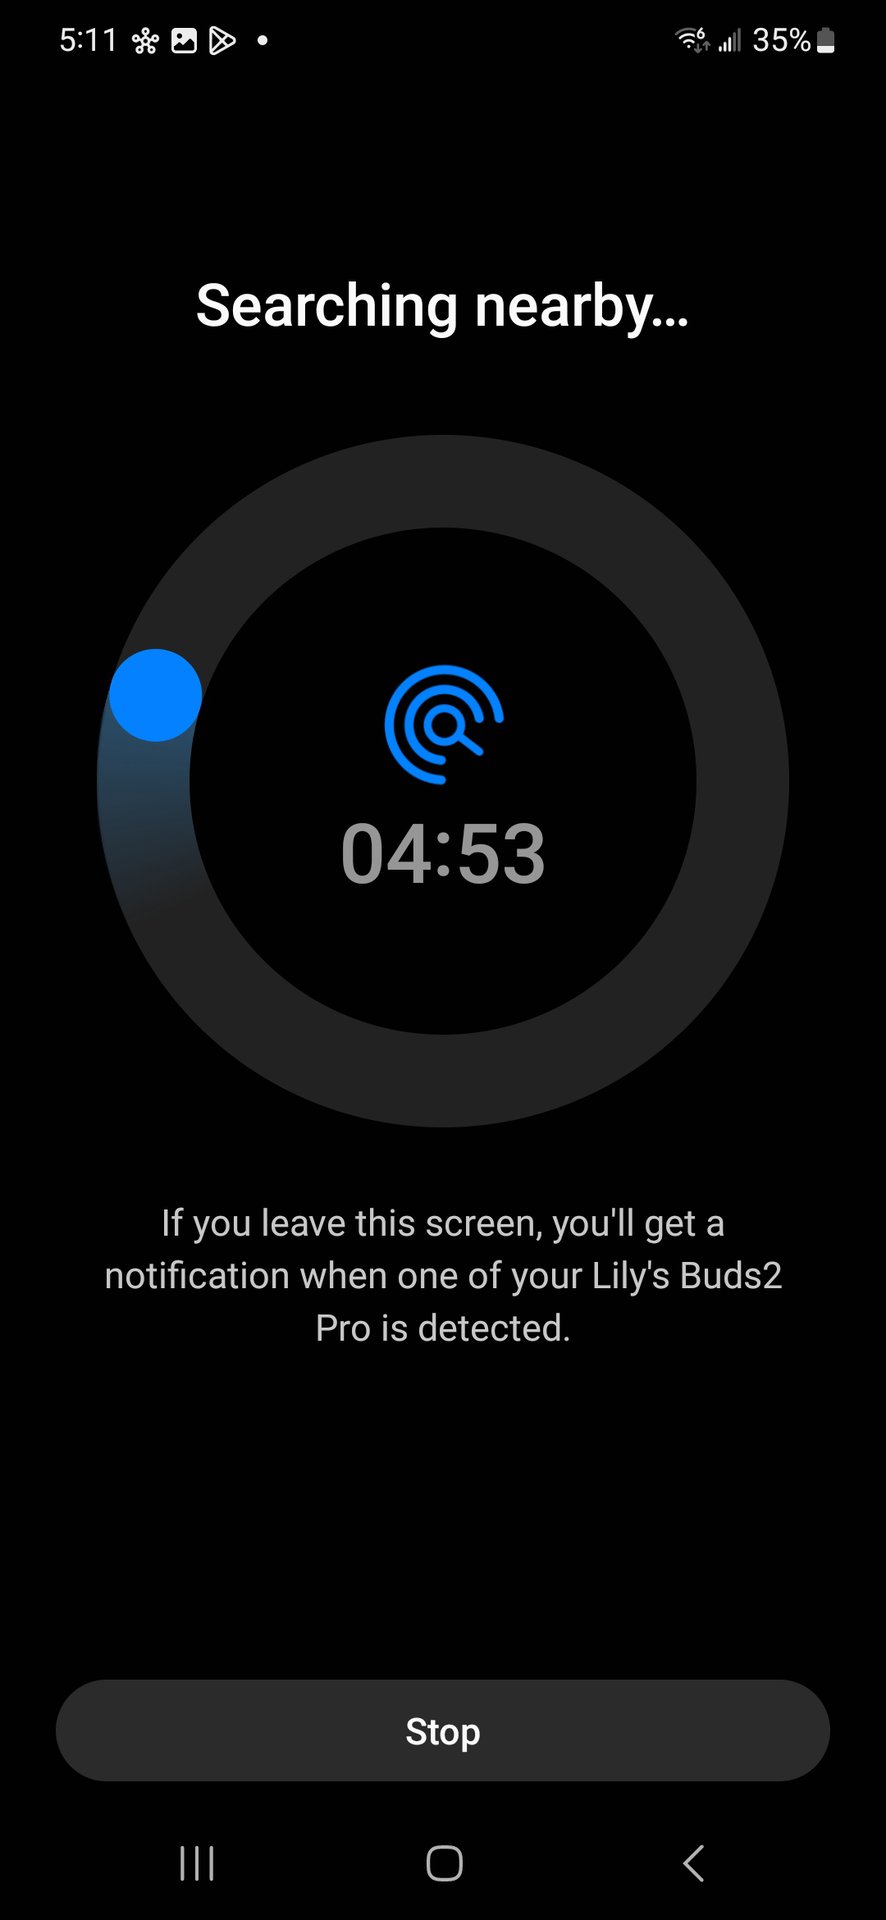 Samsung Galaxy Buds 2 Pro SmartThings app Search nearby active